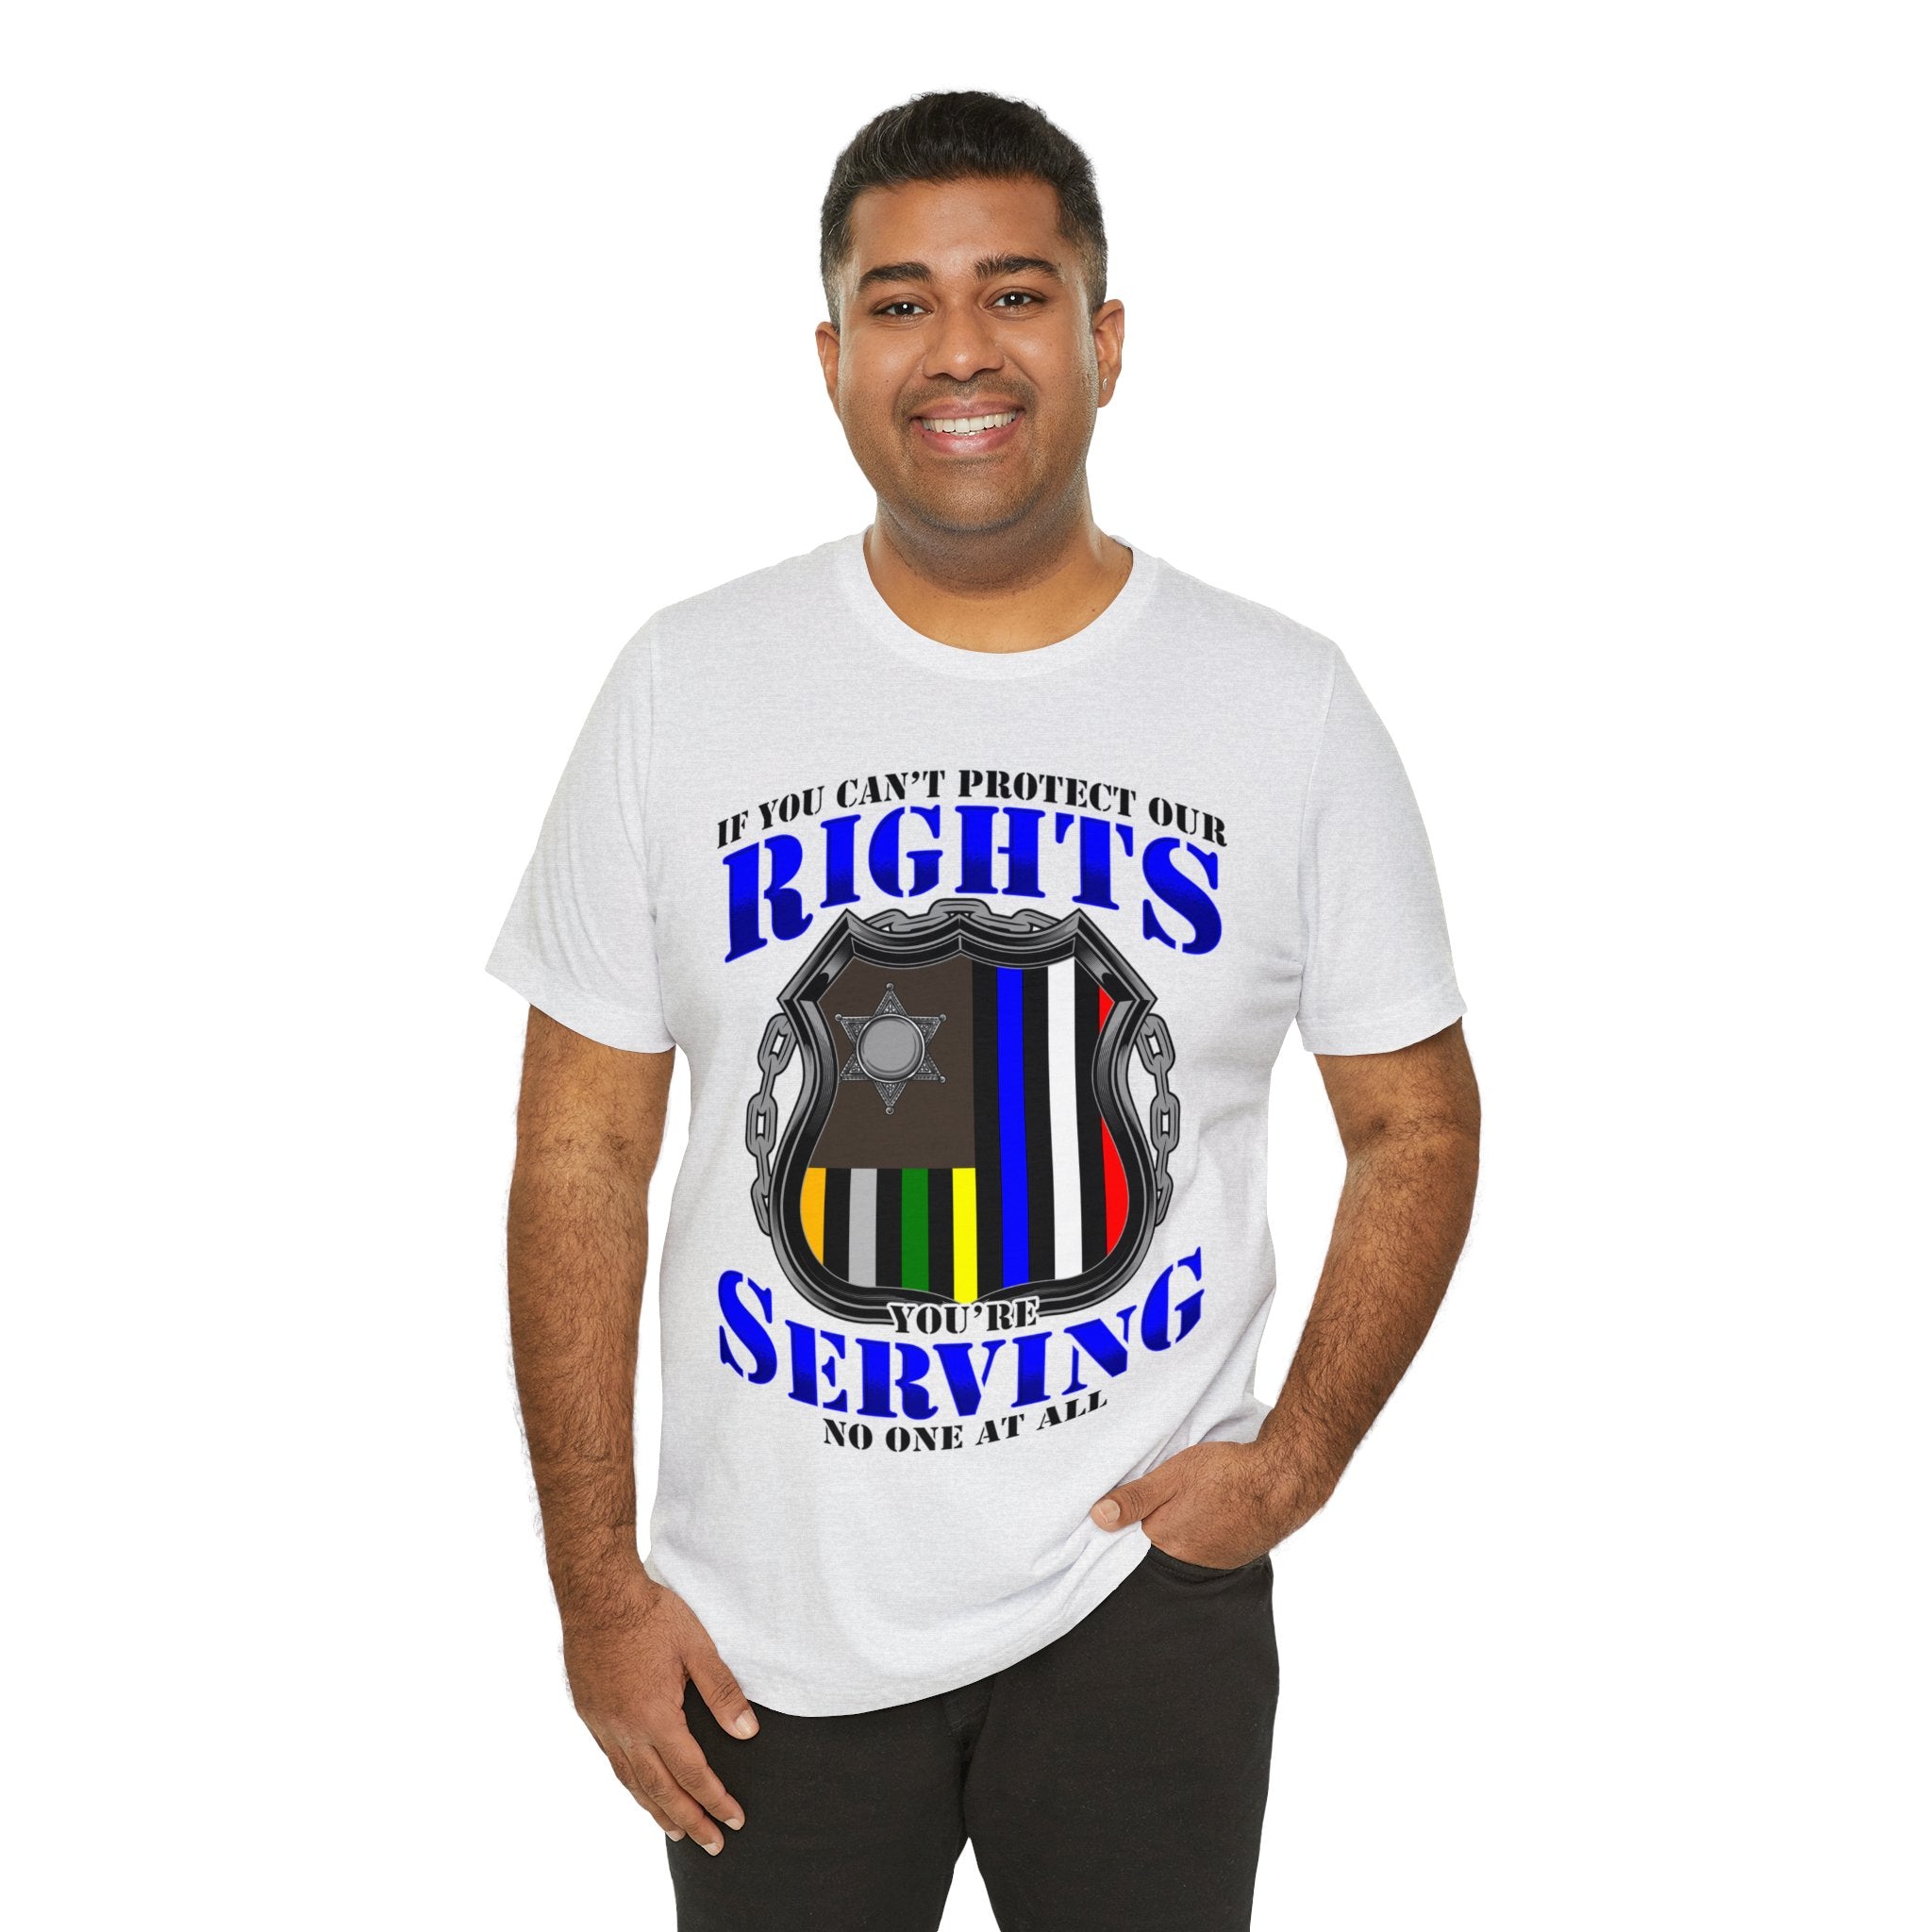 Thin Police Line Tee - Rights/Serving